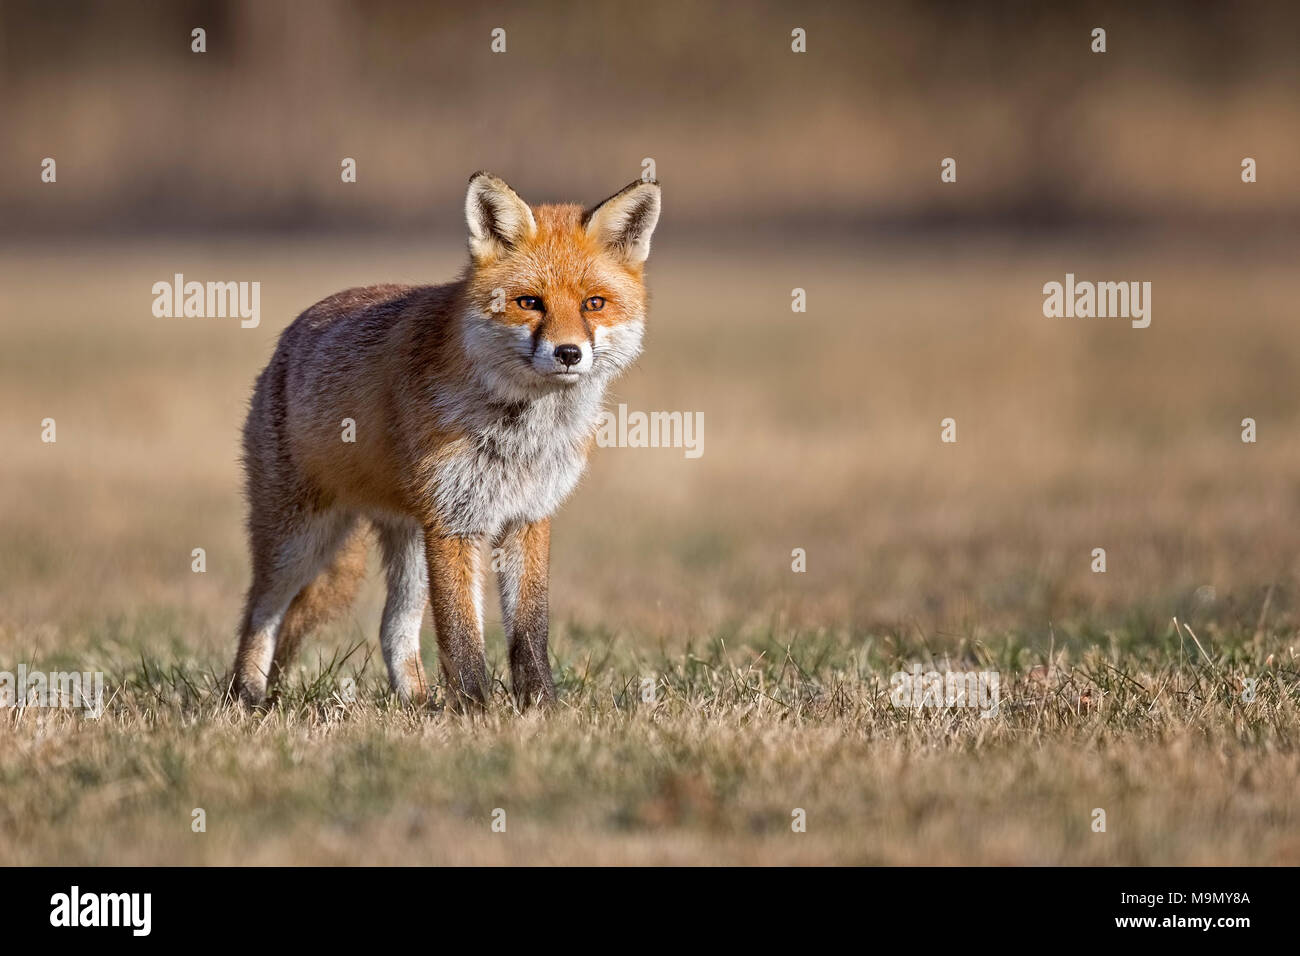 Red fox (Vulpes vulpes) with winter fur, Biosphere Reserve Mittelelbe, Saxony-Anhalt, Germany Stock Photo